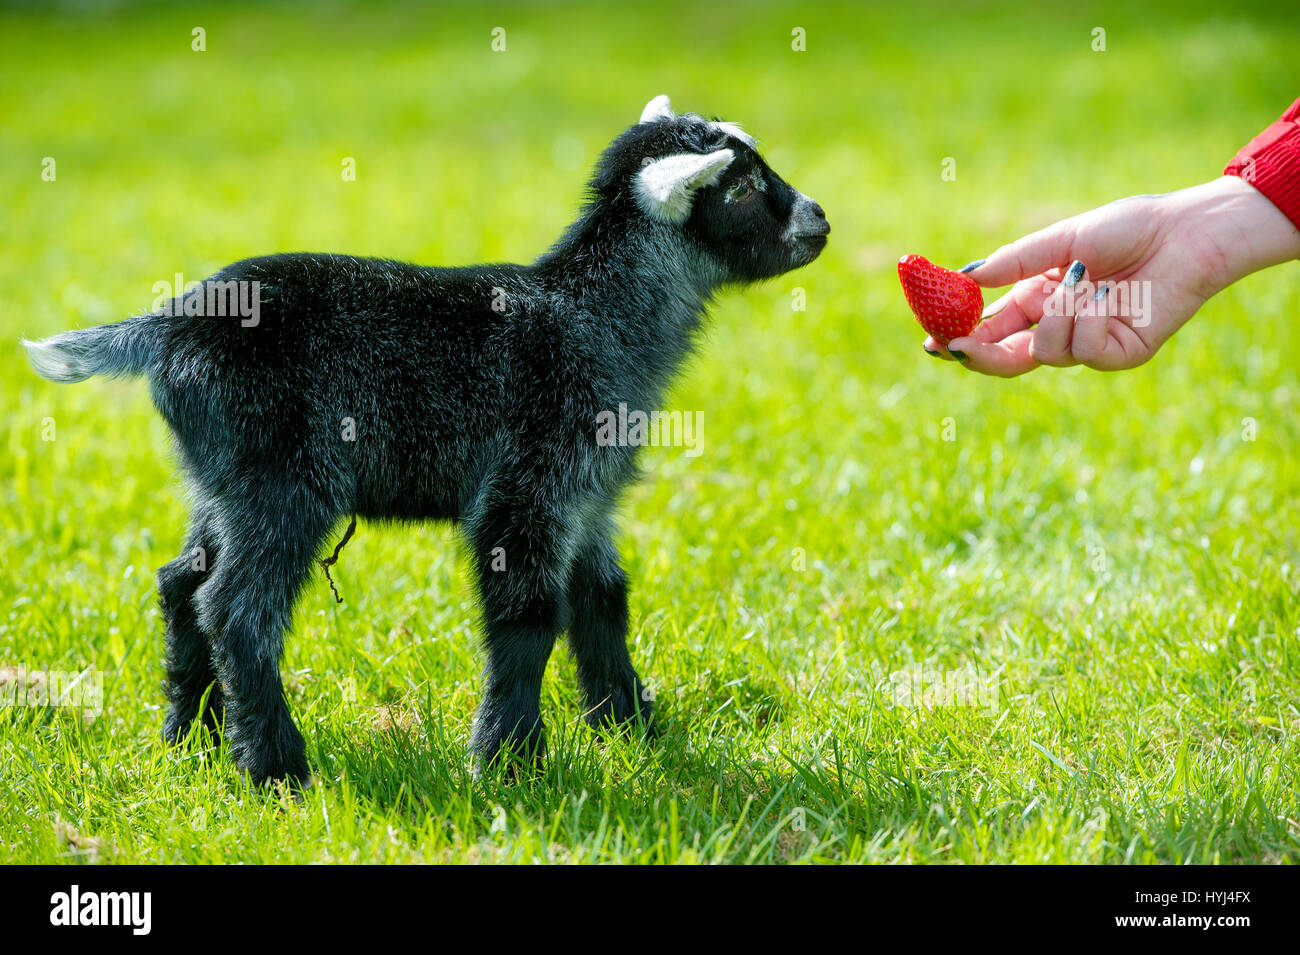 Bolton, UK. 4th Apr, 2017. Beautiful warm spring sunshine enticed this two day old Pygmy Goat out into the light at Smithills Hall Farm, Bolton, Lancashire. The furry fellow took its first steps out in the outside world and also got a taste of its first strawberry as the sunny weather continued in the North West of England. Picture by Paul Heyes, Tuesday April 04, 2017. Credit: Paul Heyes/Alamy Live News Stock Photo